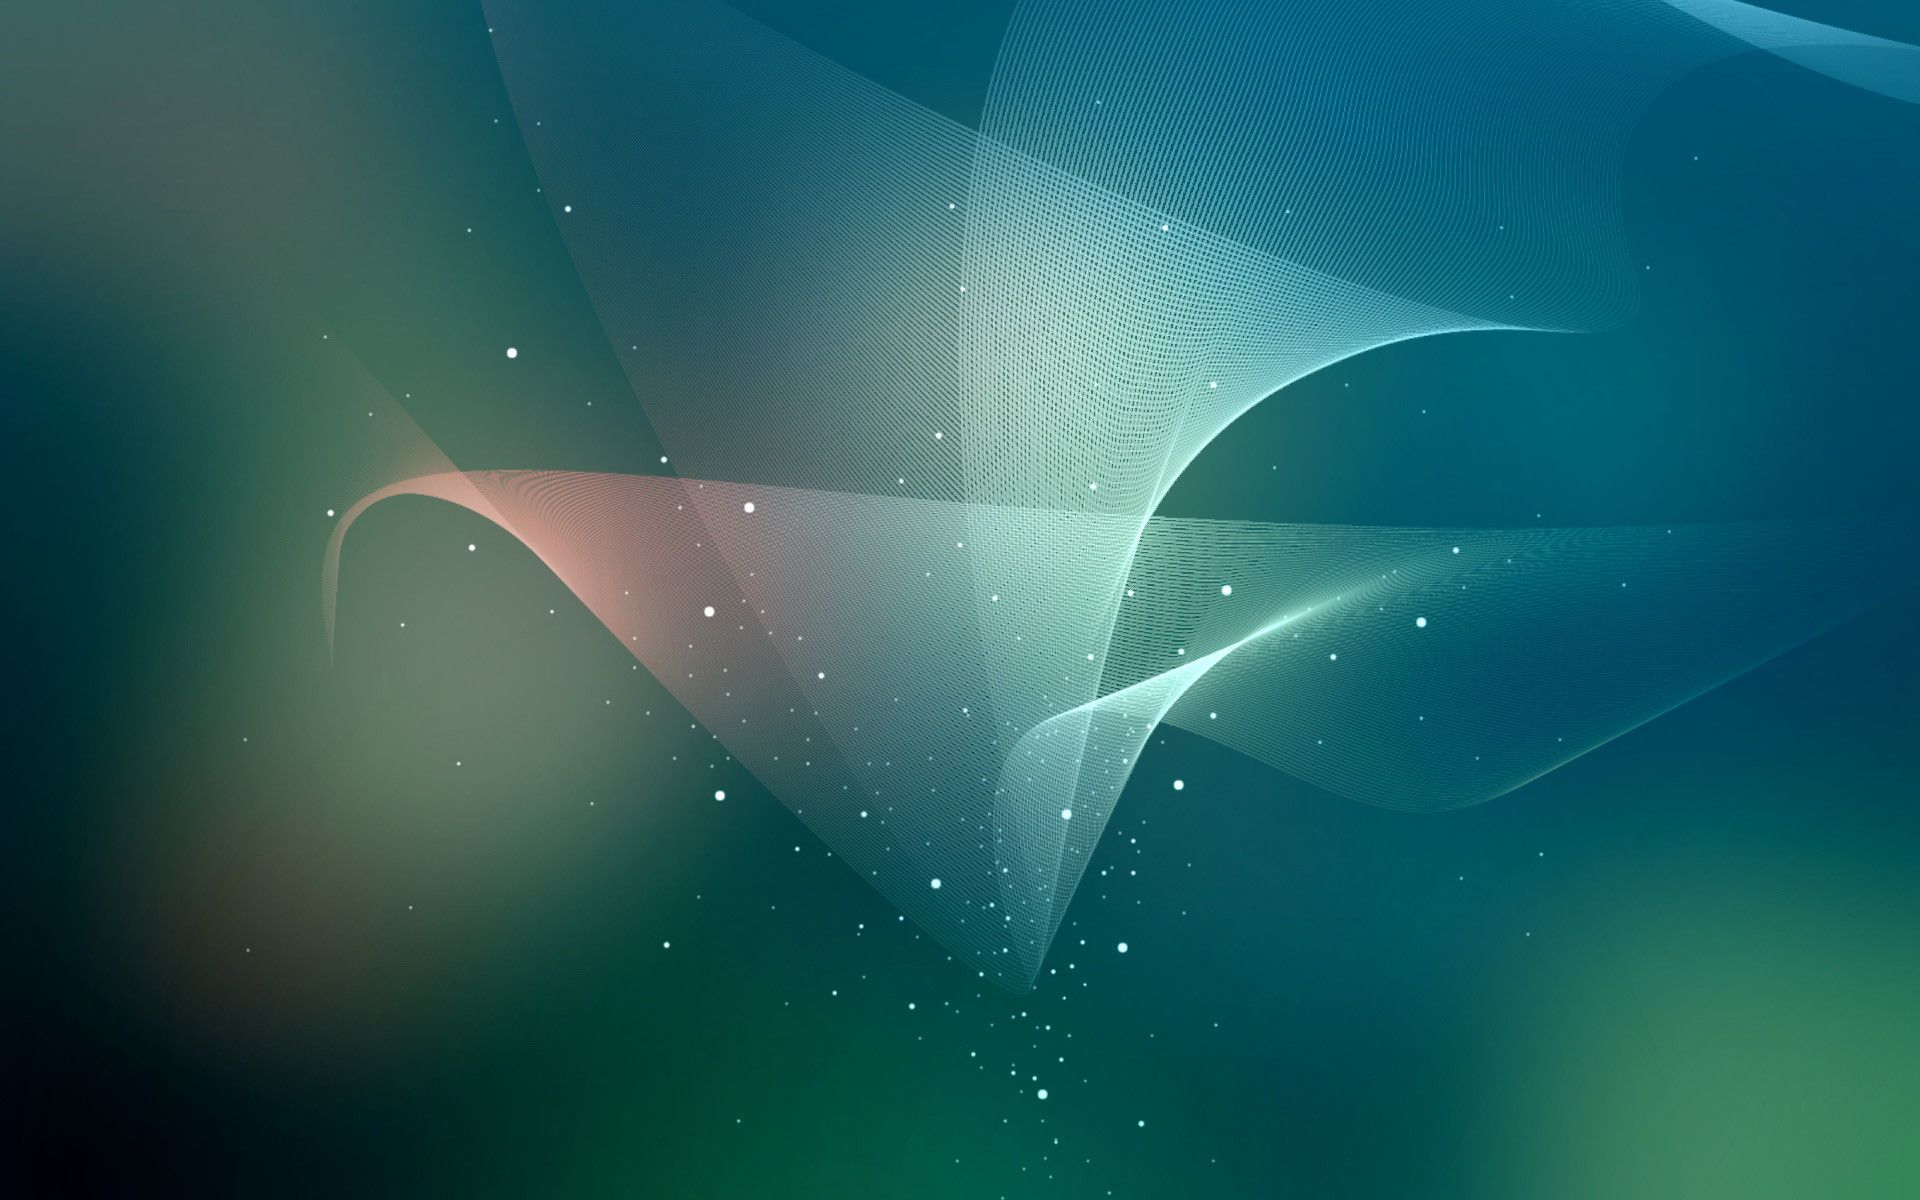 Cool Teal Wallpapers